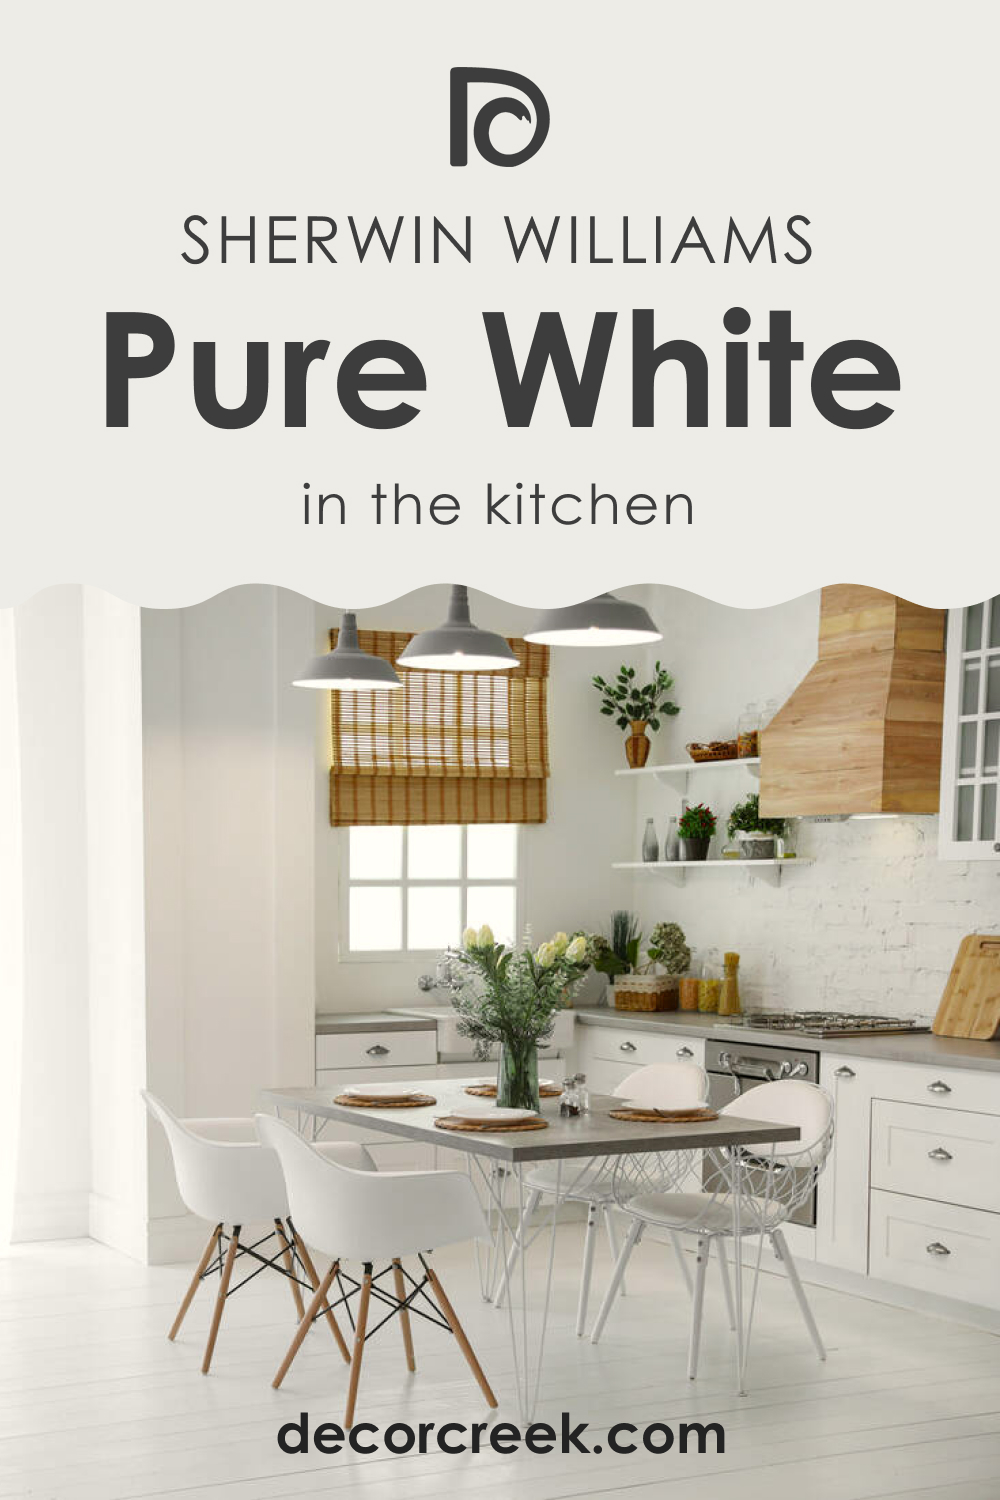 How to Use Pure White SW 7005 for the Kitchen?